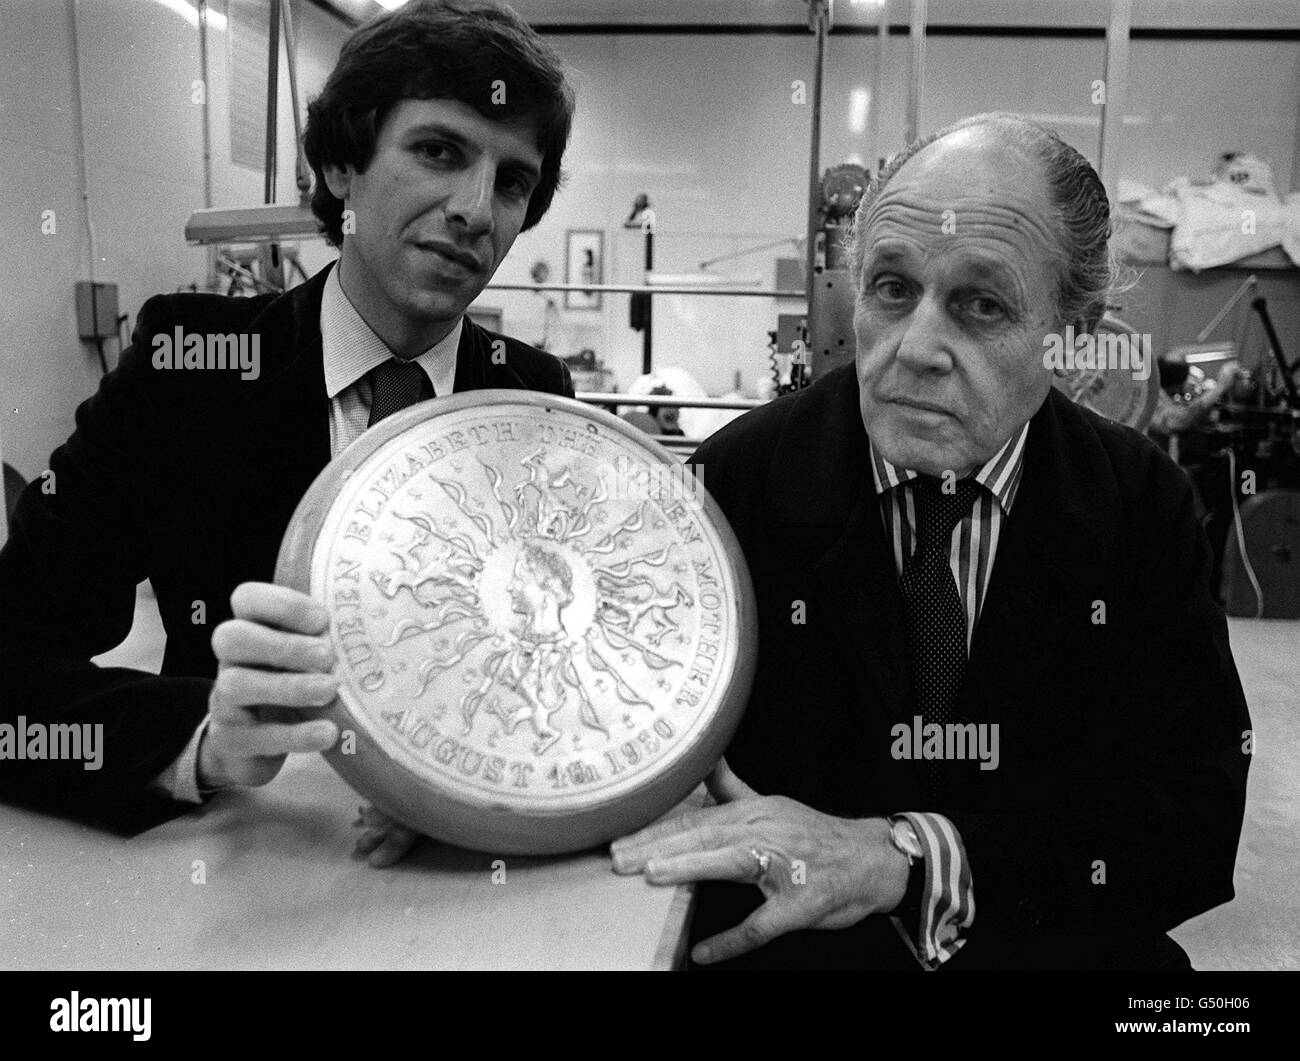 Robert Elderton (L) holding the electro-type with which a new 25 pence crown has been struck commemorating the Queen Mother's 80th birthday, at the Royal Mint in Llantrisant, South Wales. Elderton is with Richard Guyatt (R). * ...a professor of graphic arts at the Royal College of Art, with whom Elderton worked with for the winning design. Stock Photo